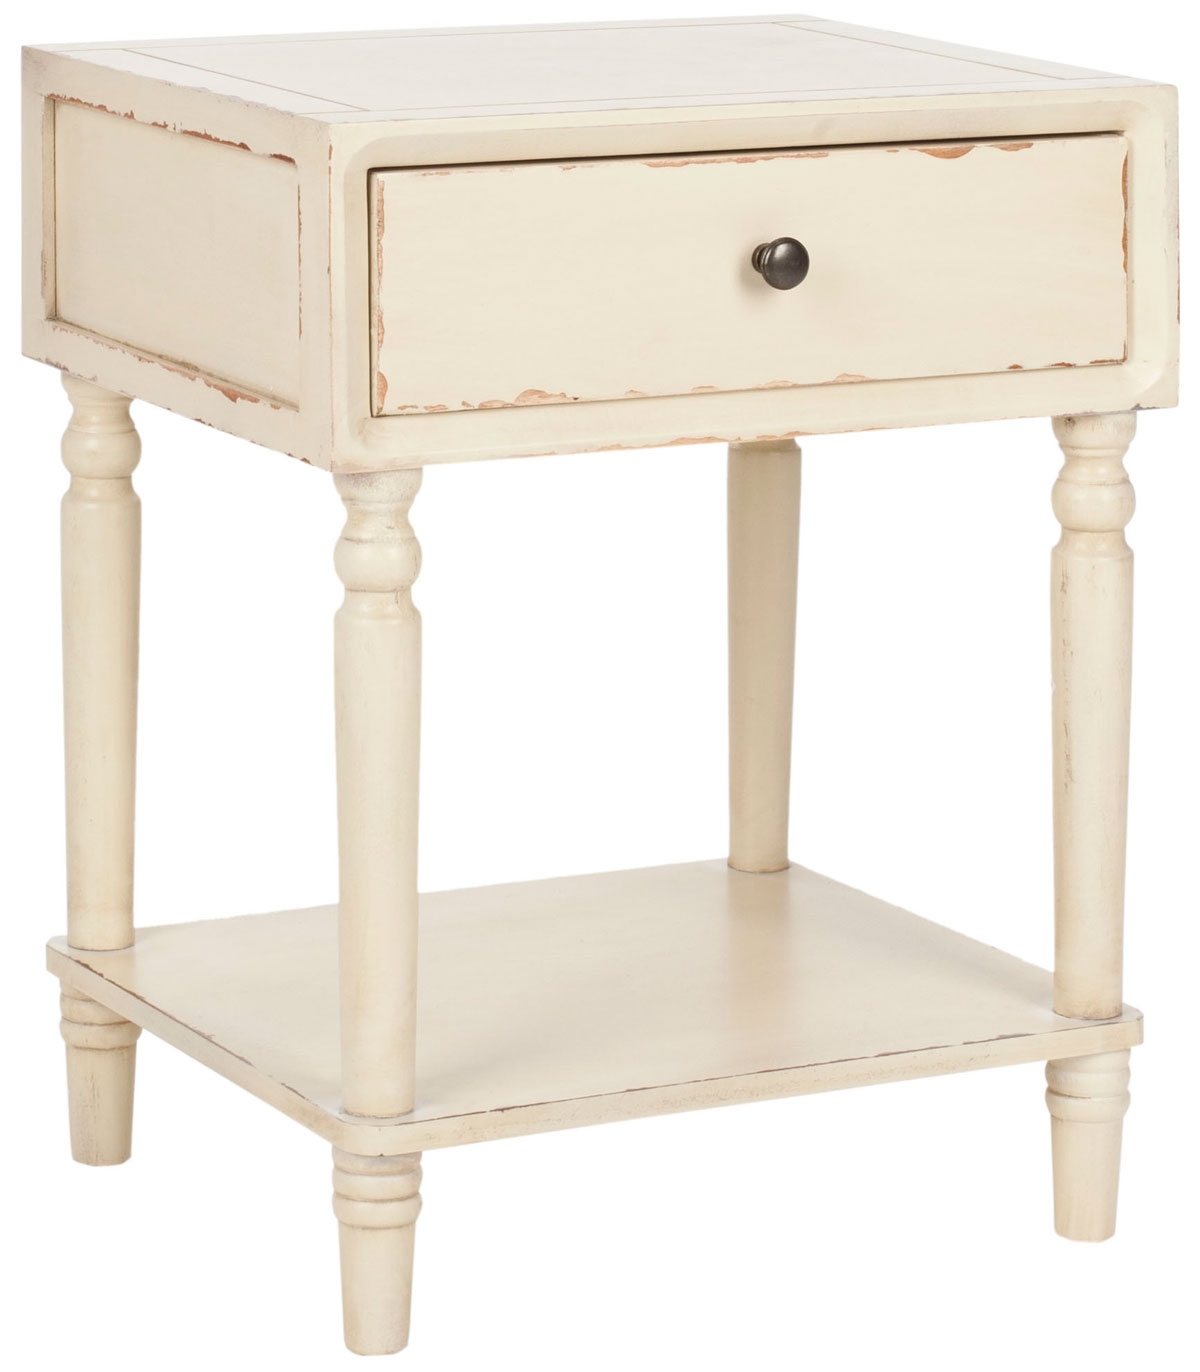 Siobhan Nightstand With Storage Drawer - Vintage Cream - Arlo Home - Image 1